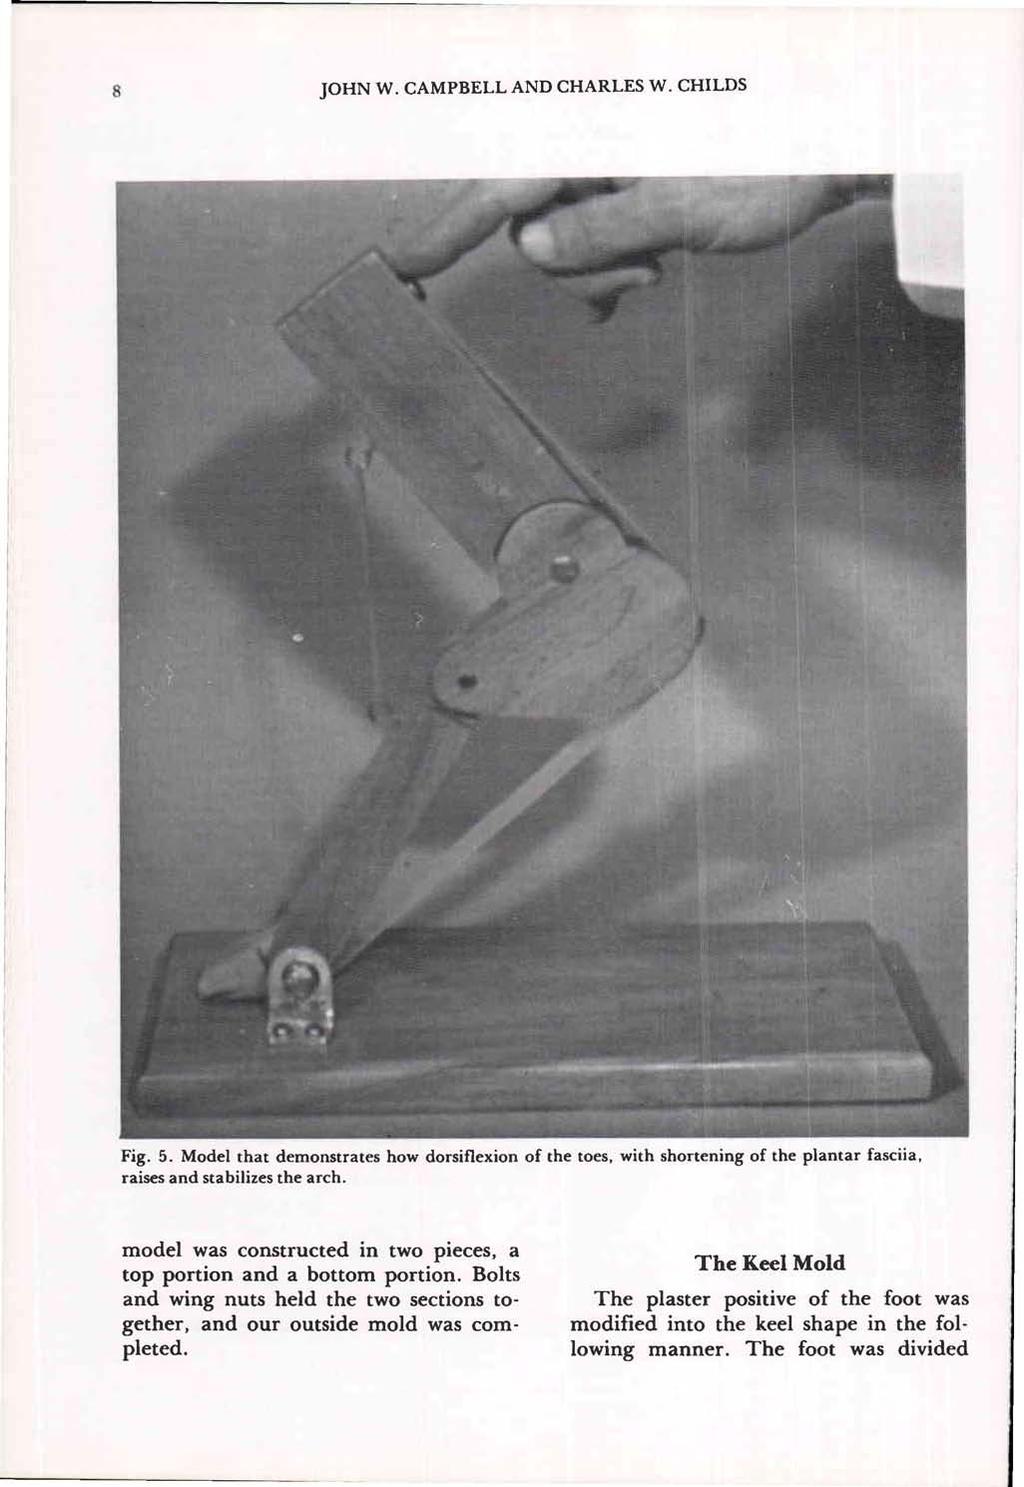 Fig. 5. Model that demonstrates how dorsiflexion of the toes, with shortening of the plantar fasciia, raises and stabilizes the arch.